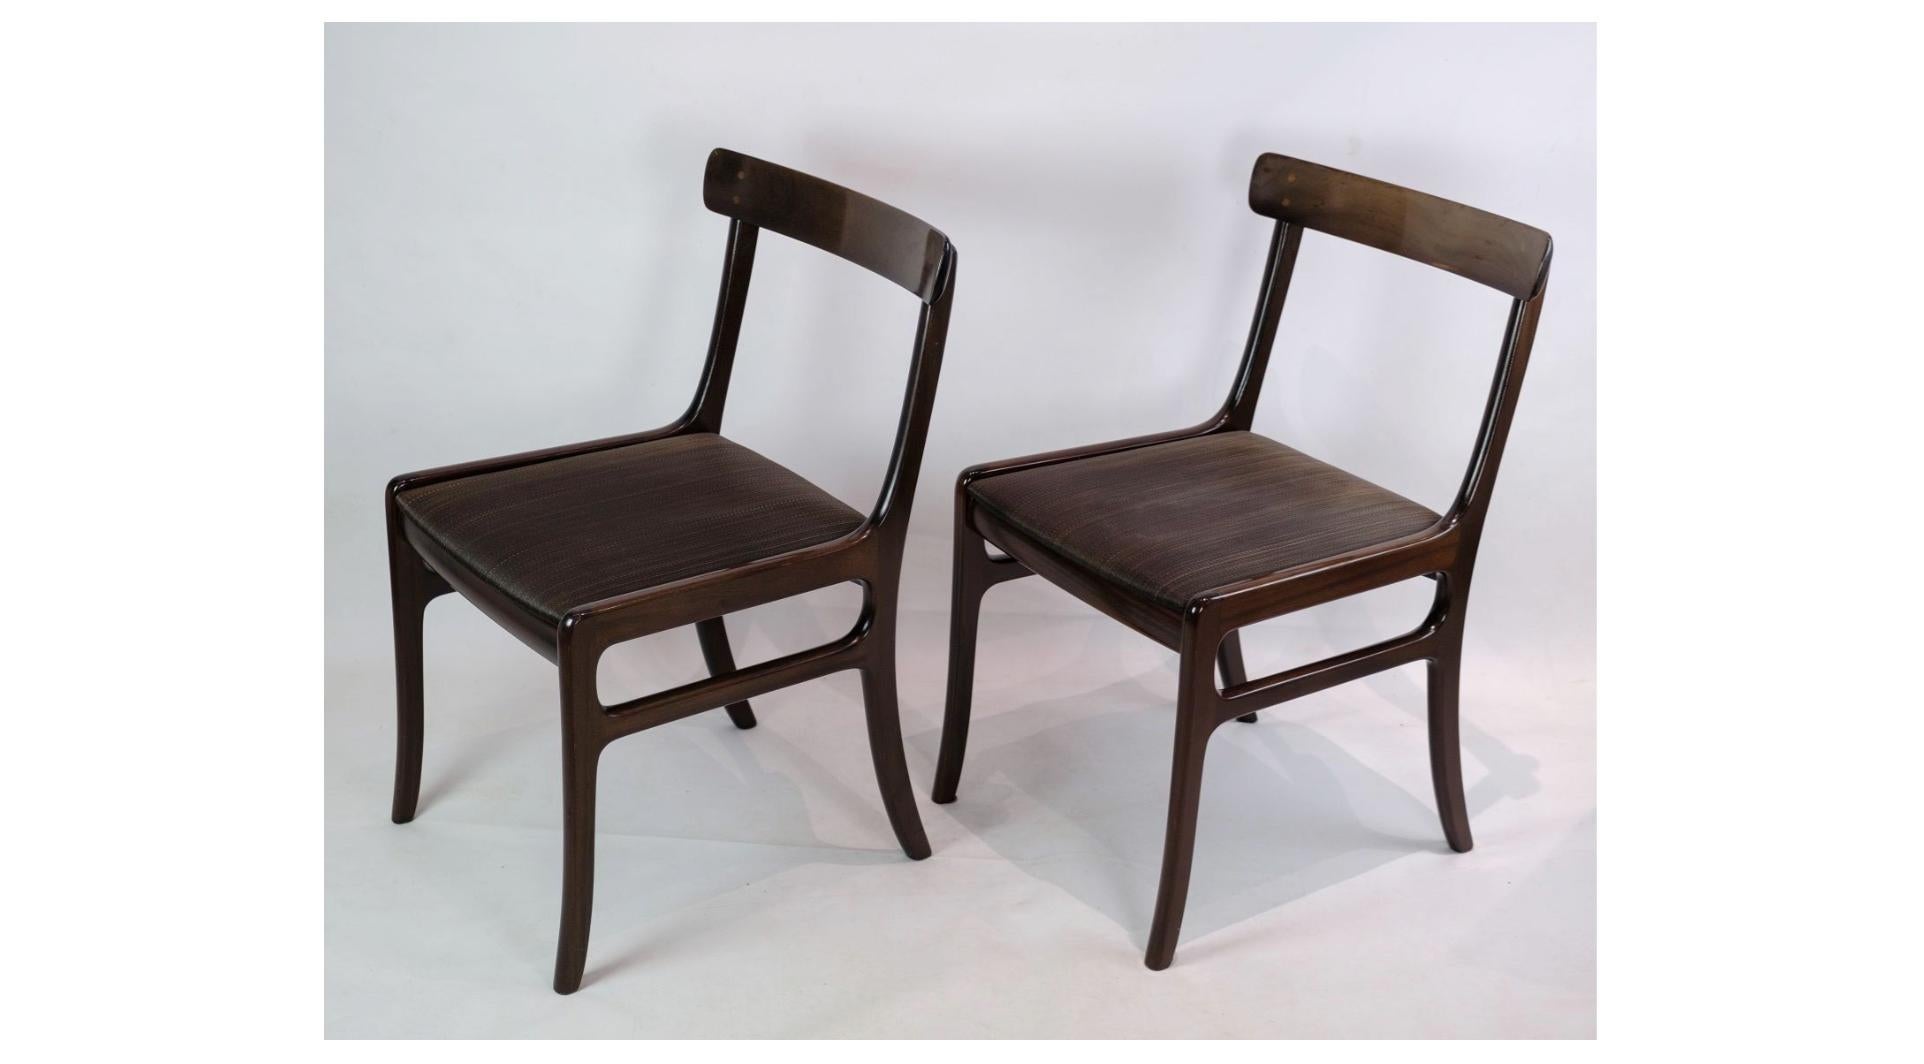 A pair of Rungstedlund mahogany dining chairs, designed by Ole Wanscher and manufactured by P. Jeppesen, is a beautiful example of timeless Danish design. These chairs exude a sublime elegance and simplicity that will add a warm atmosphere to any